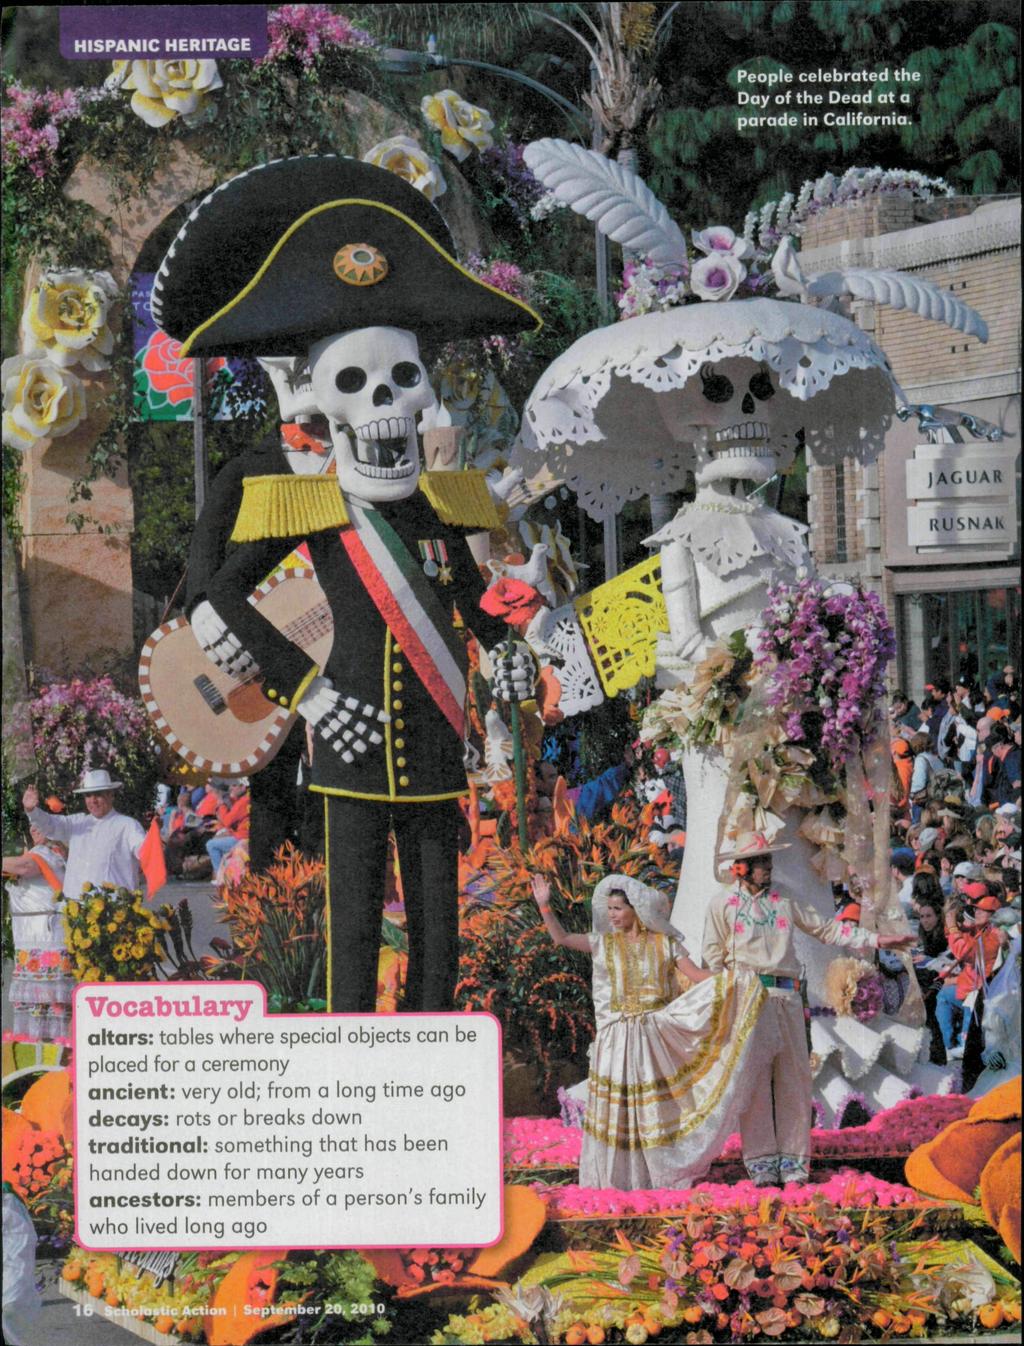 People celebrated the Day of the Dead at f^.